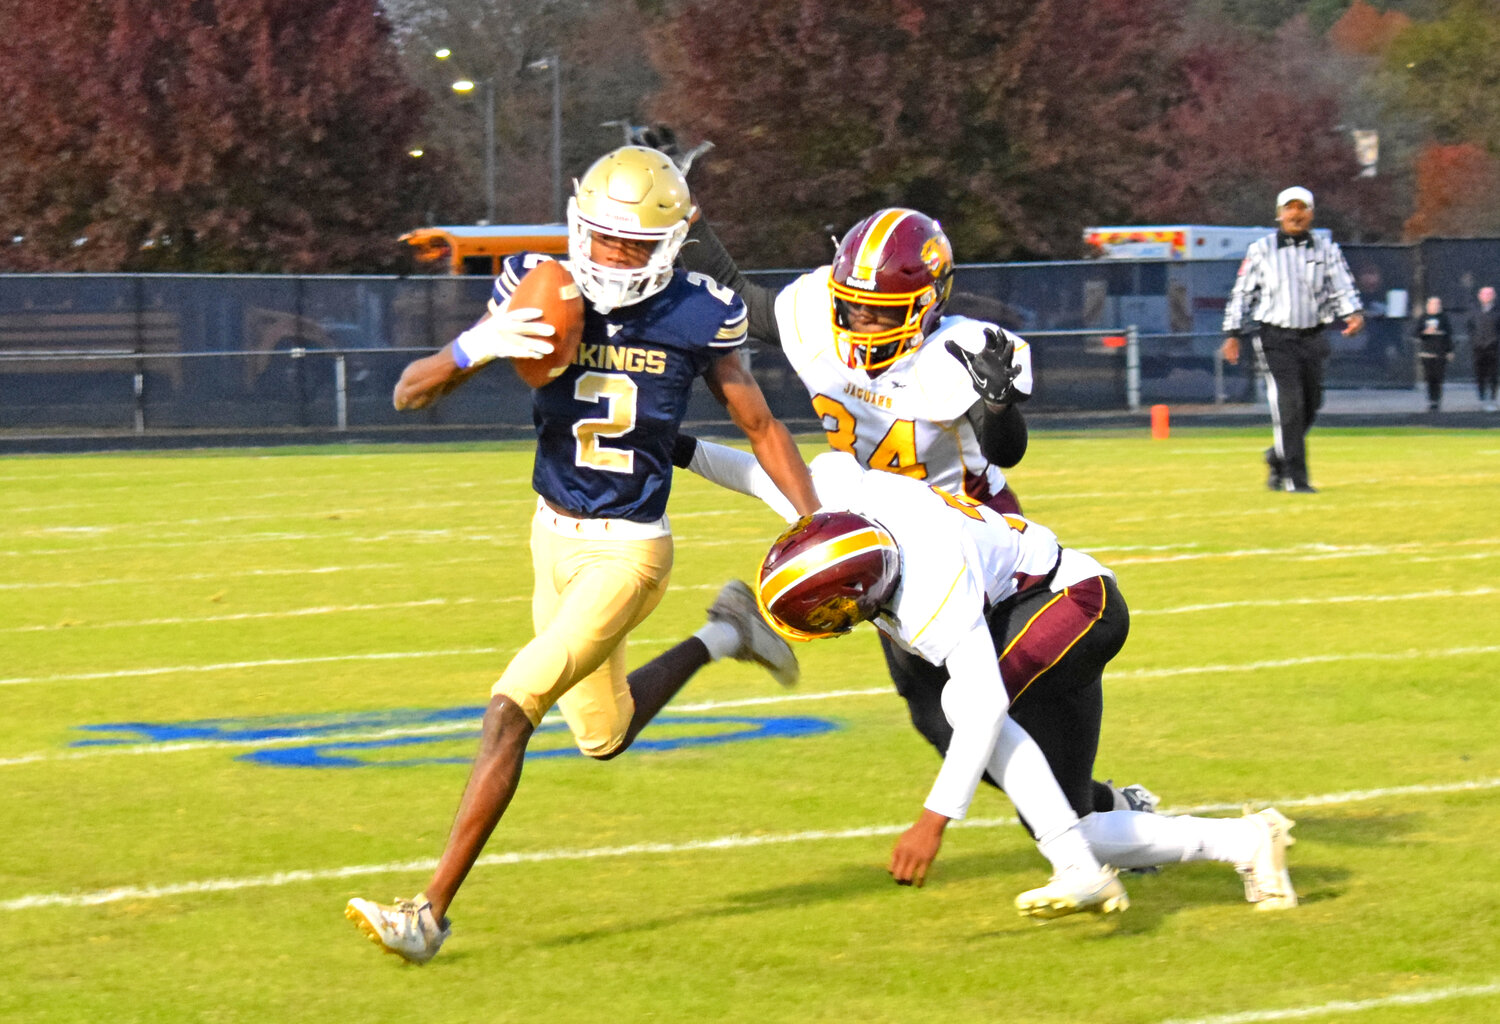 C-SD's Darren Belizaire stiff-armed a tackler as he carried the ball for a gain early in the victory over visiting Washington High School on Thursday.